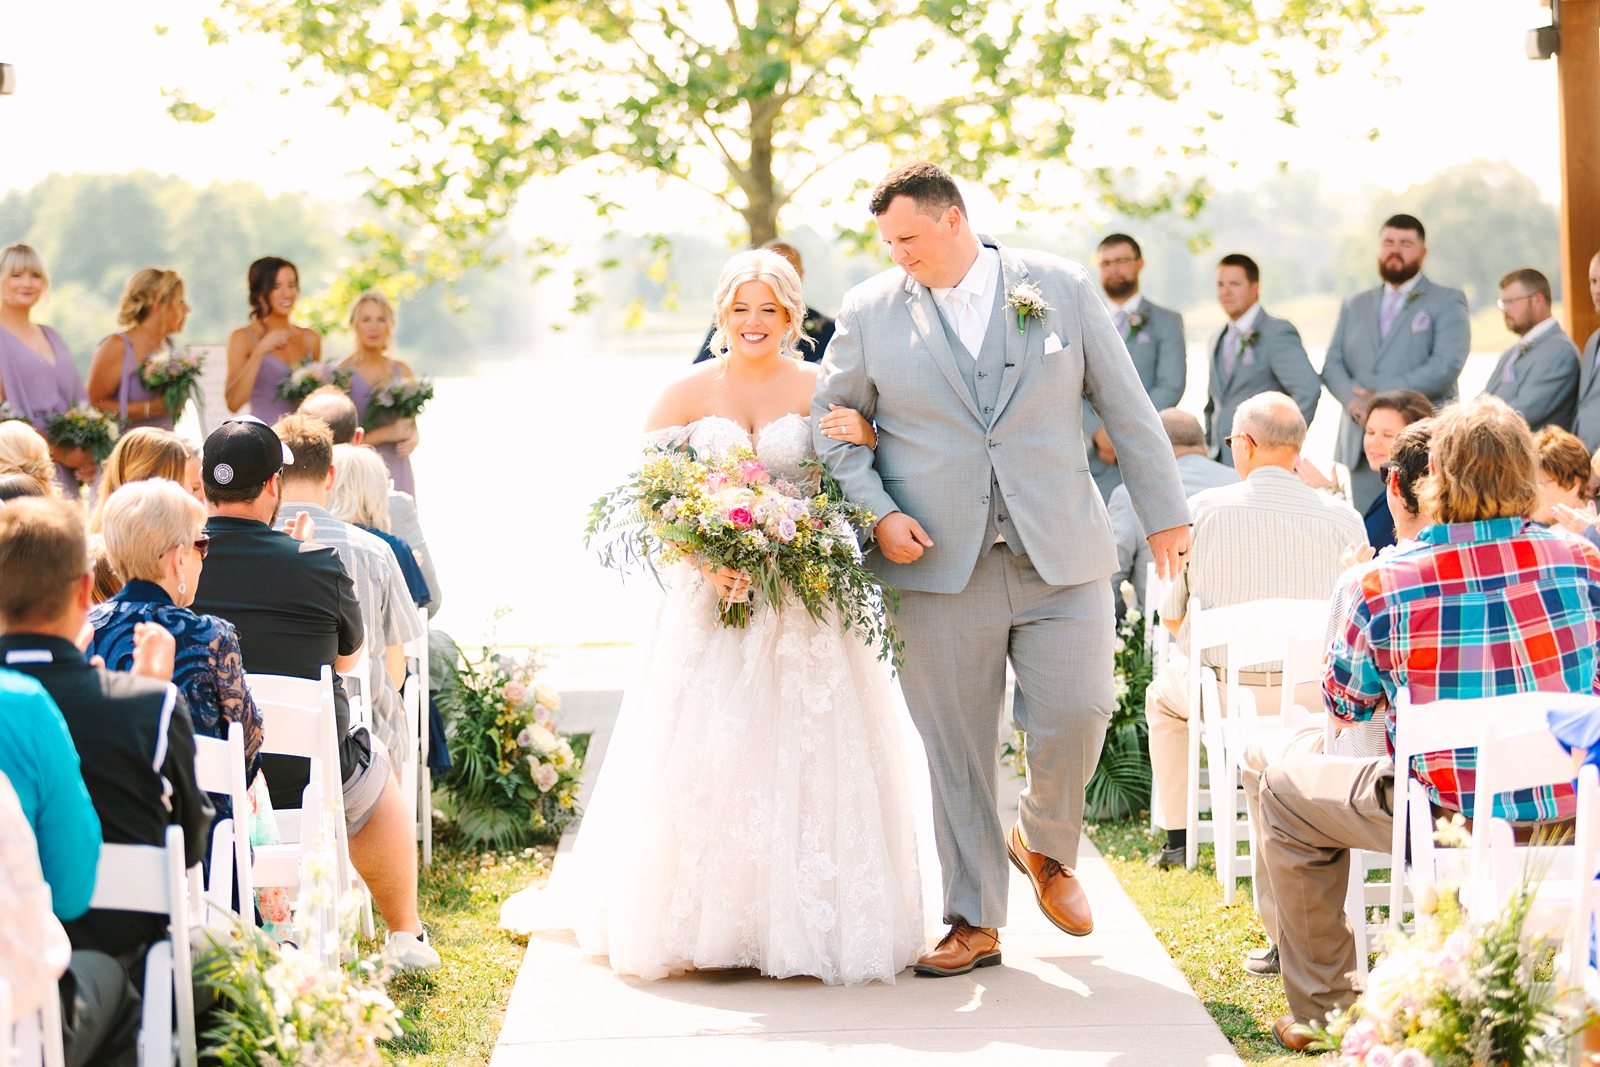 A Sunny Summer Wedding at Friedman Park in Newburgh Indiana | Paige and Dylan | Bret and Brandie Photography137.jpg